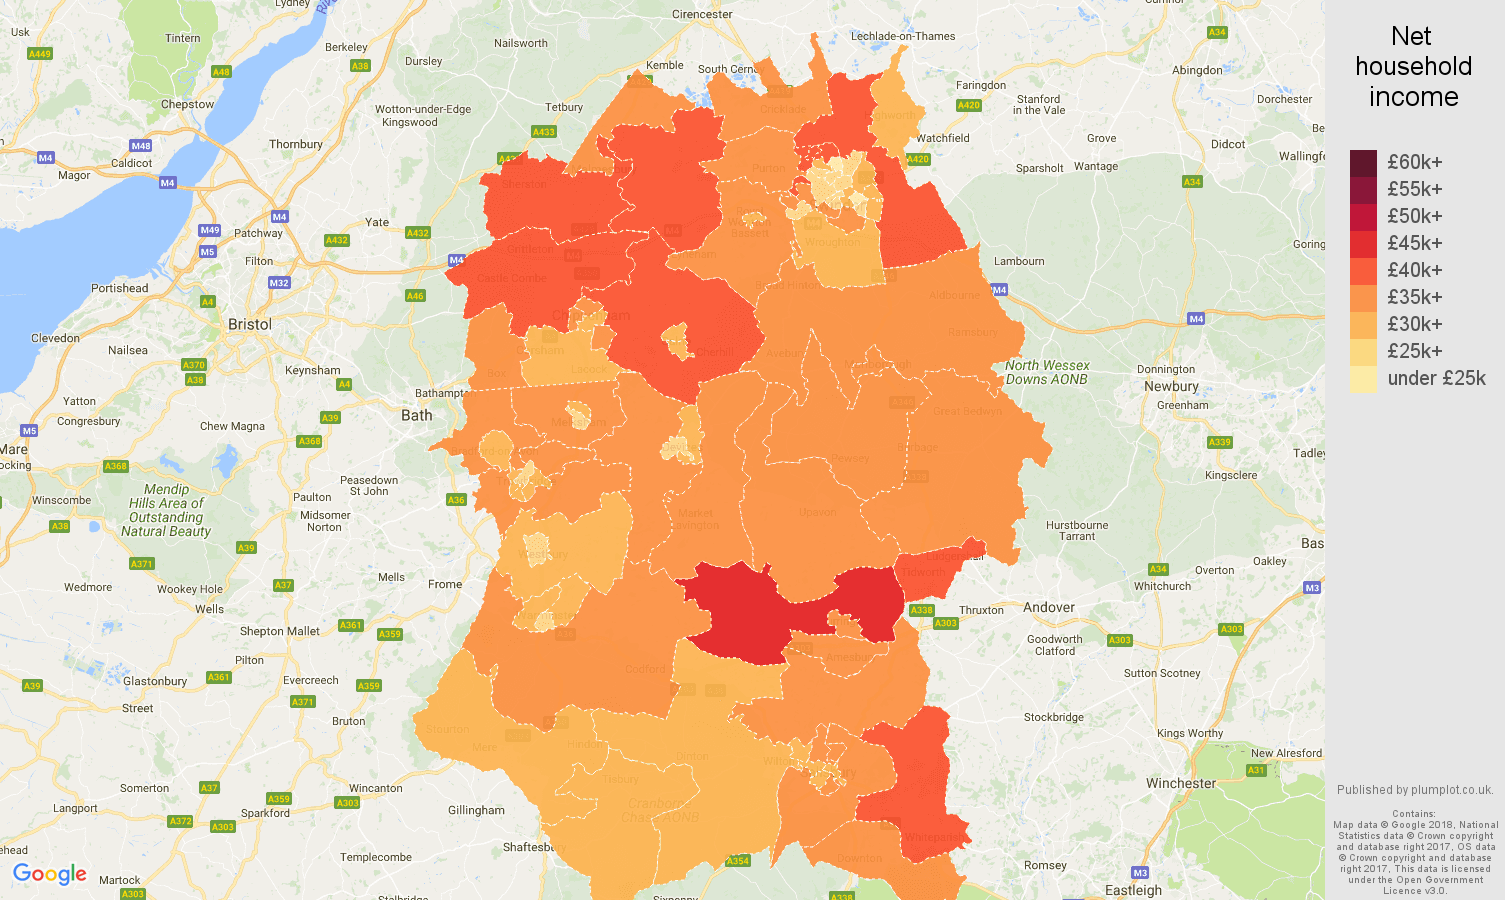 Wiltshire net household income map